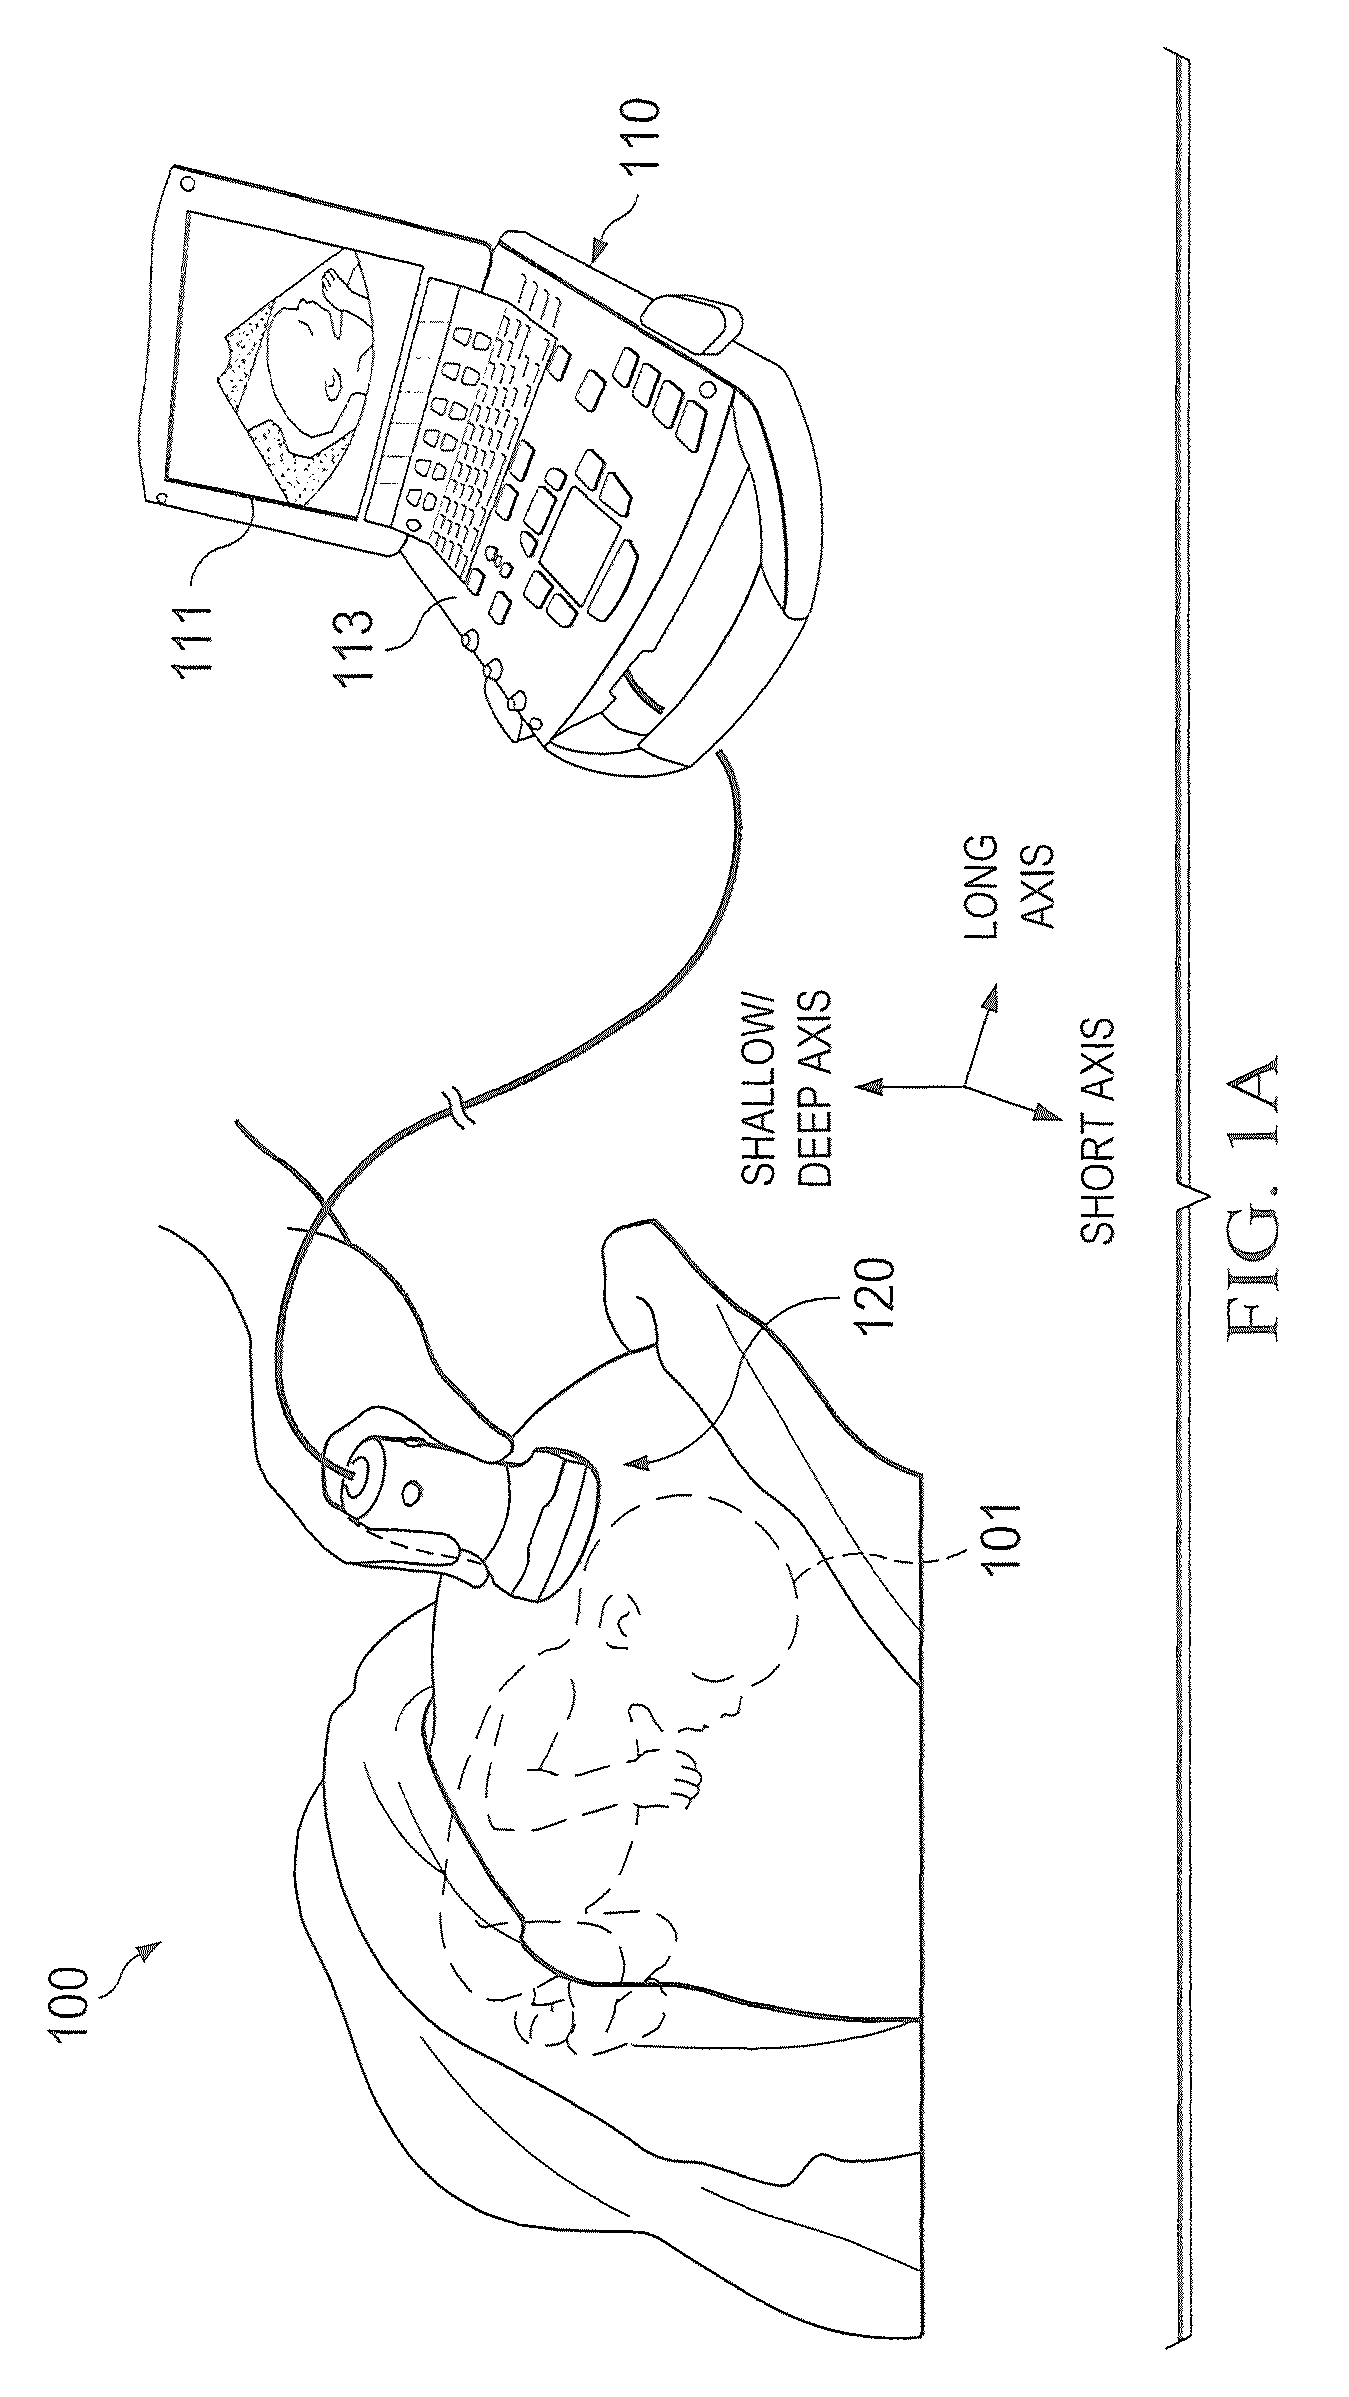 Systems and methods for adaptive volume imaging